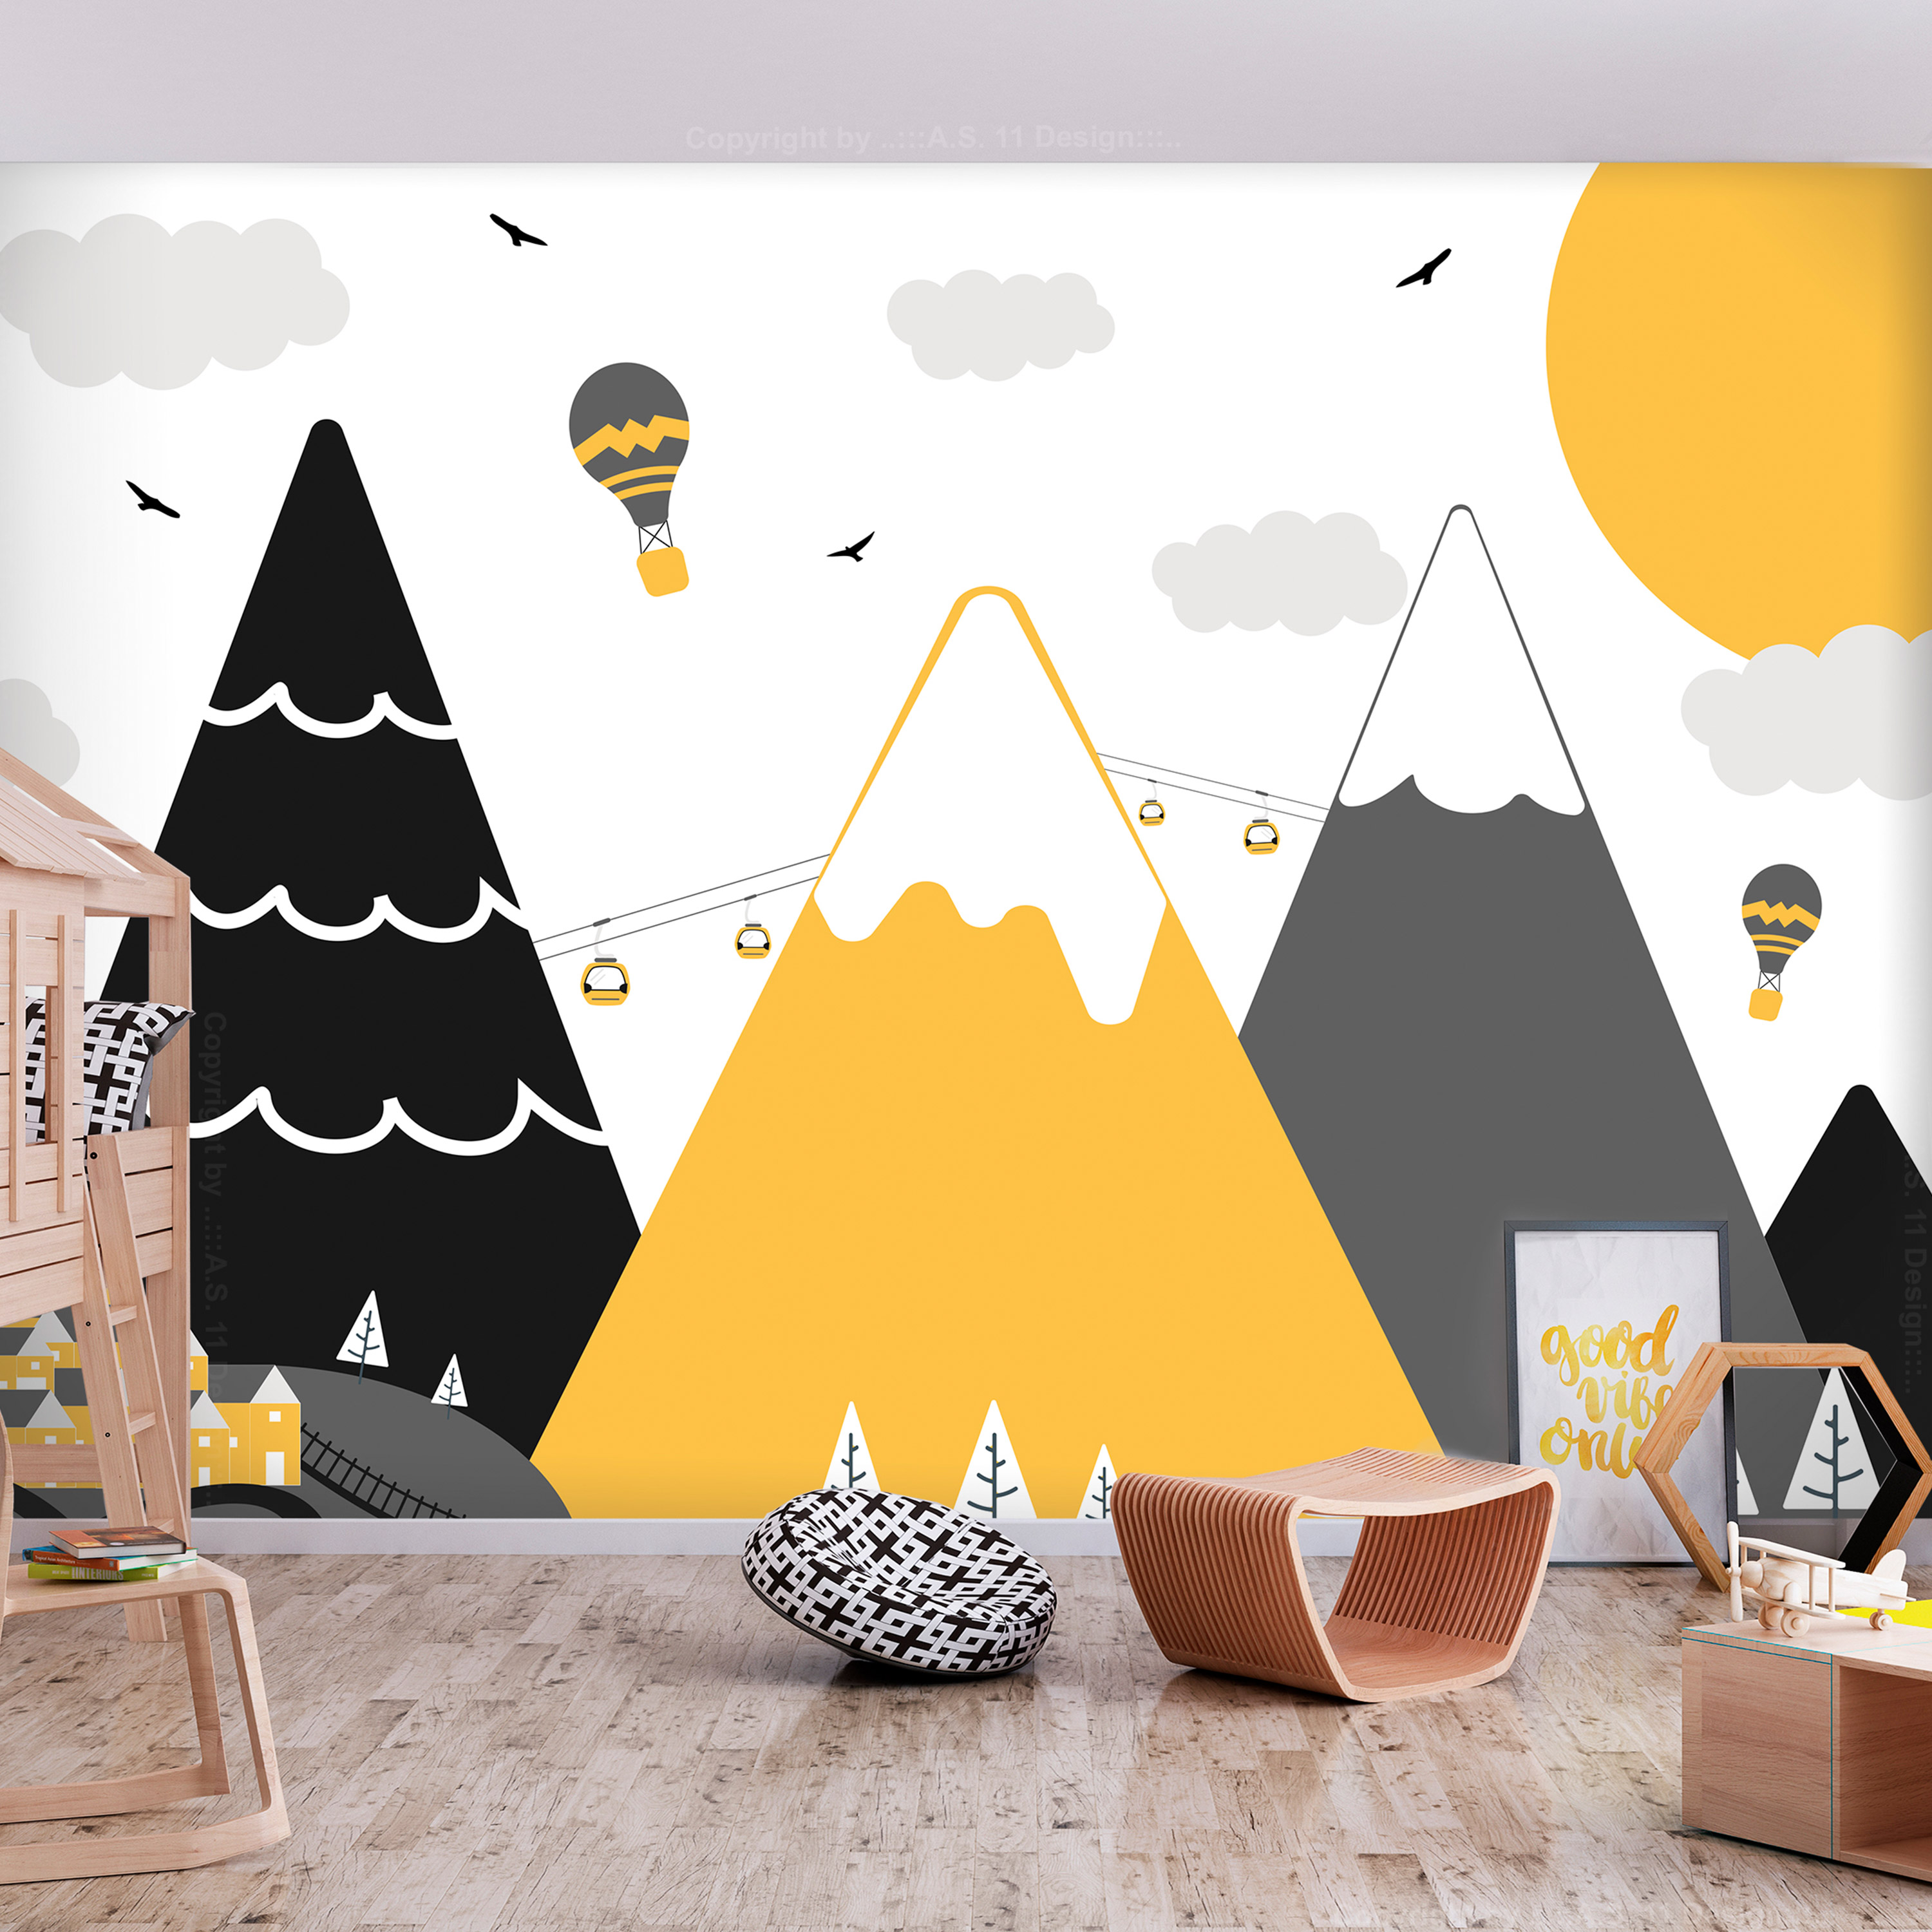 Self-adhesive Wallpaper - Adventure in the Mountains - 392x280